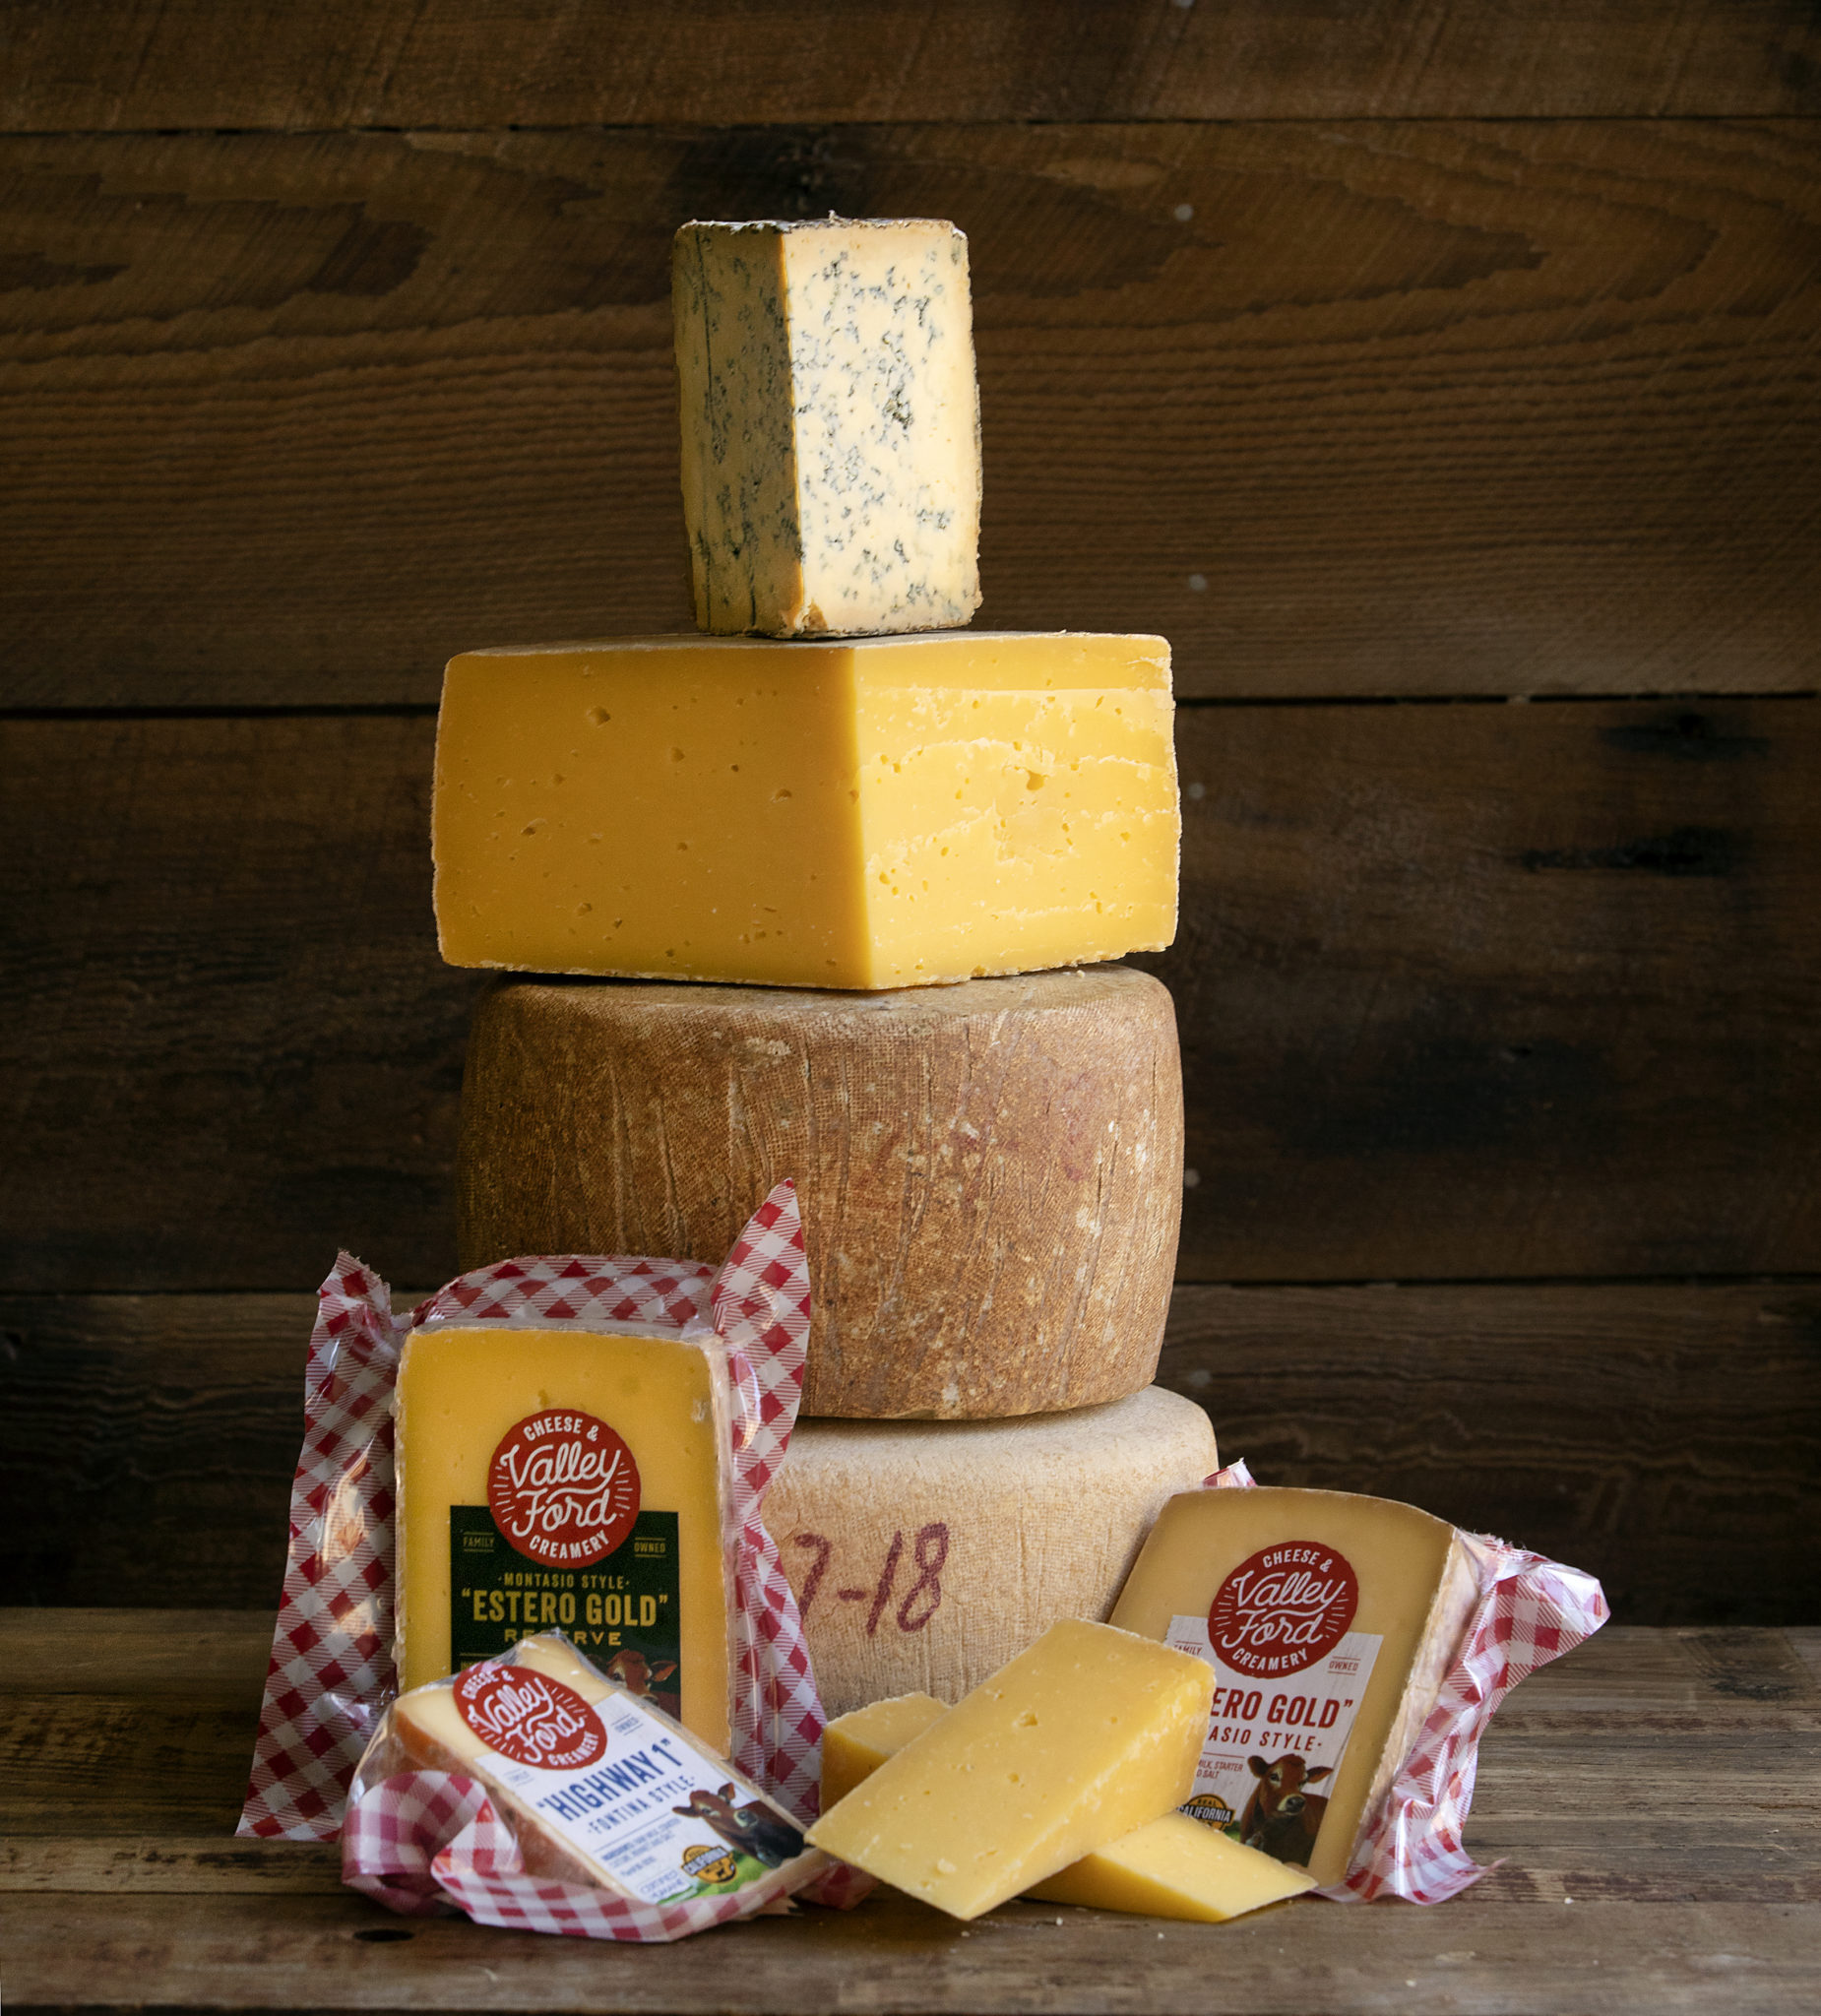 The Valley Ford Cheese & Creamery makes four varieties of cheese: "Highway 1" Fontina style, "Grazin Girl" Gorgonzola style, and two different "Estero Gold" Montasio style cheeses. (photo by John Burgess/Sonoma Magazine)